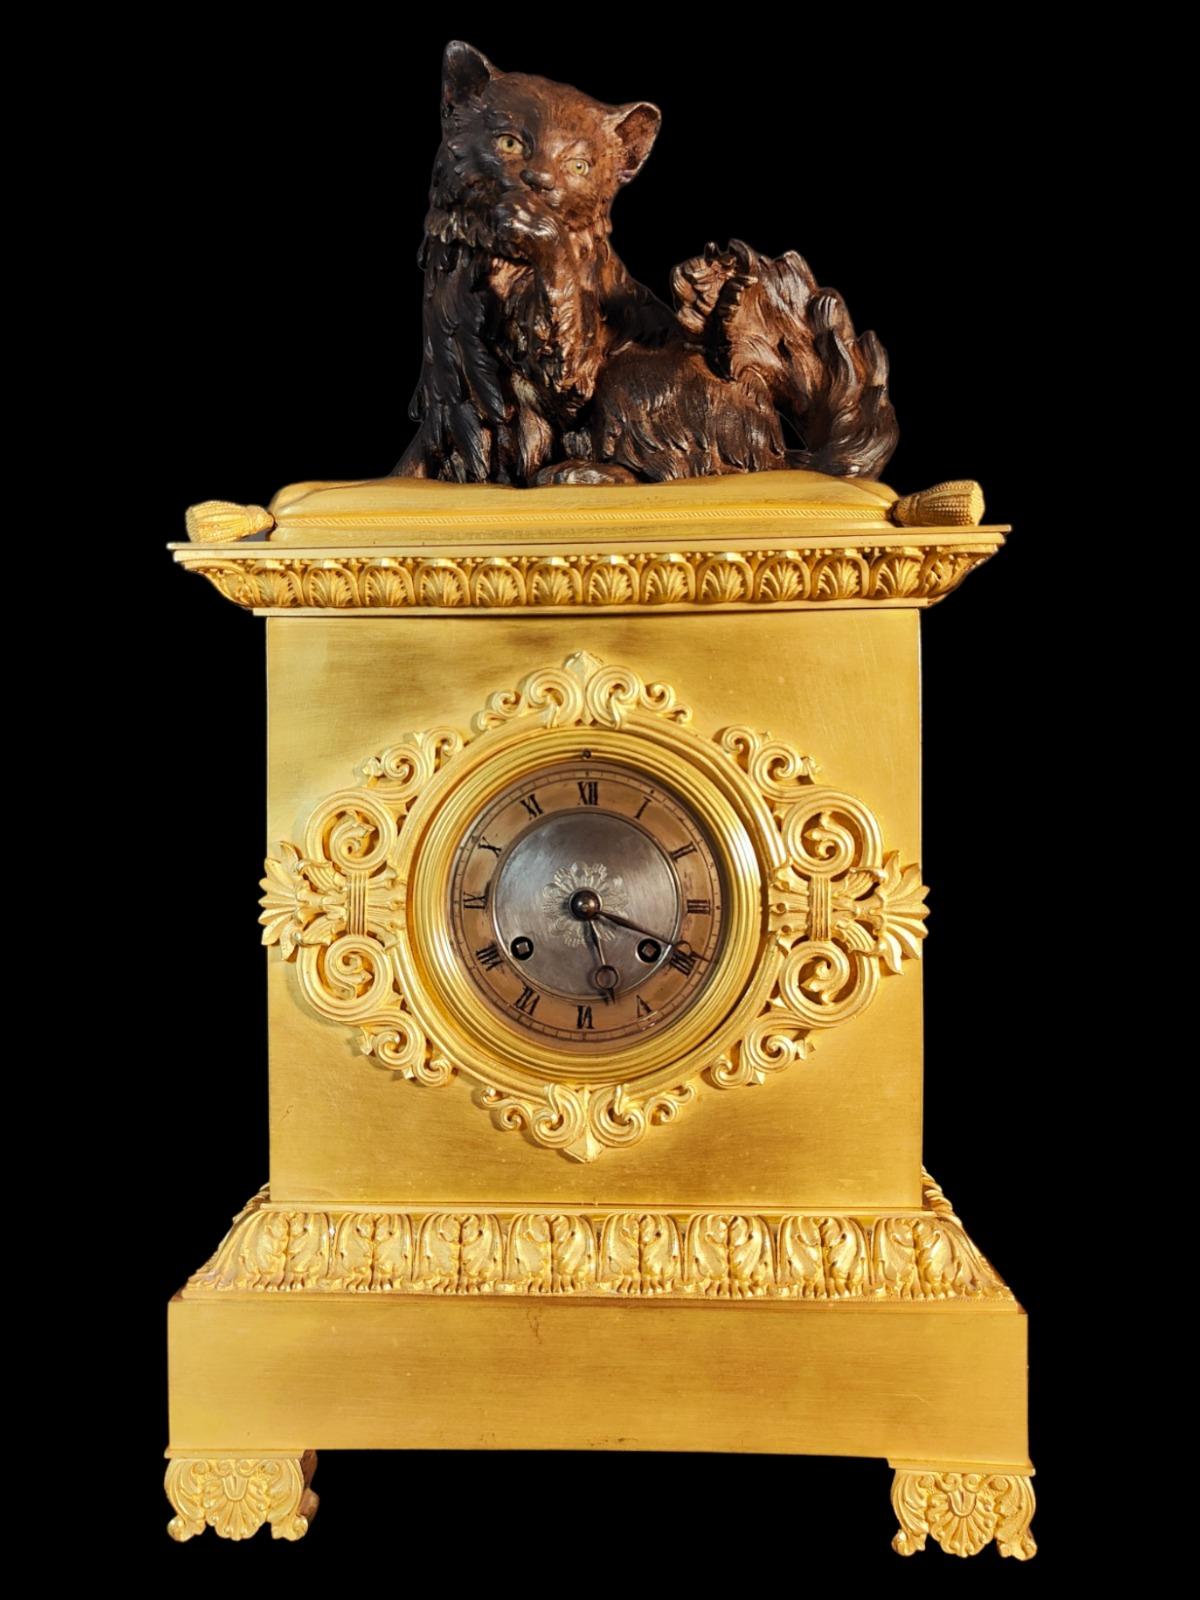 Hand-Crafted Early 1800 Automaton Clock 19th Century